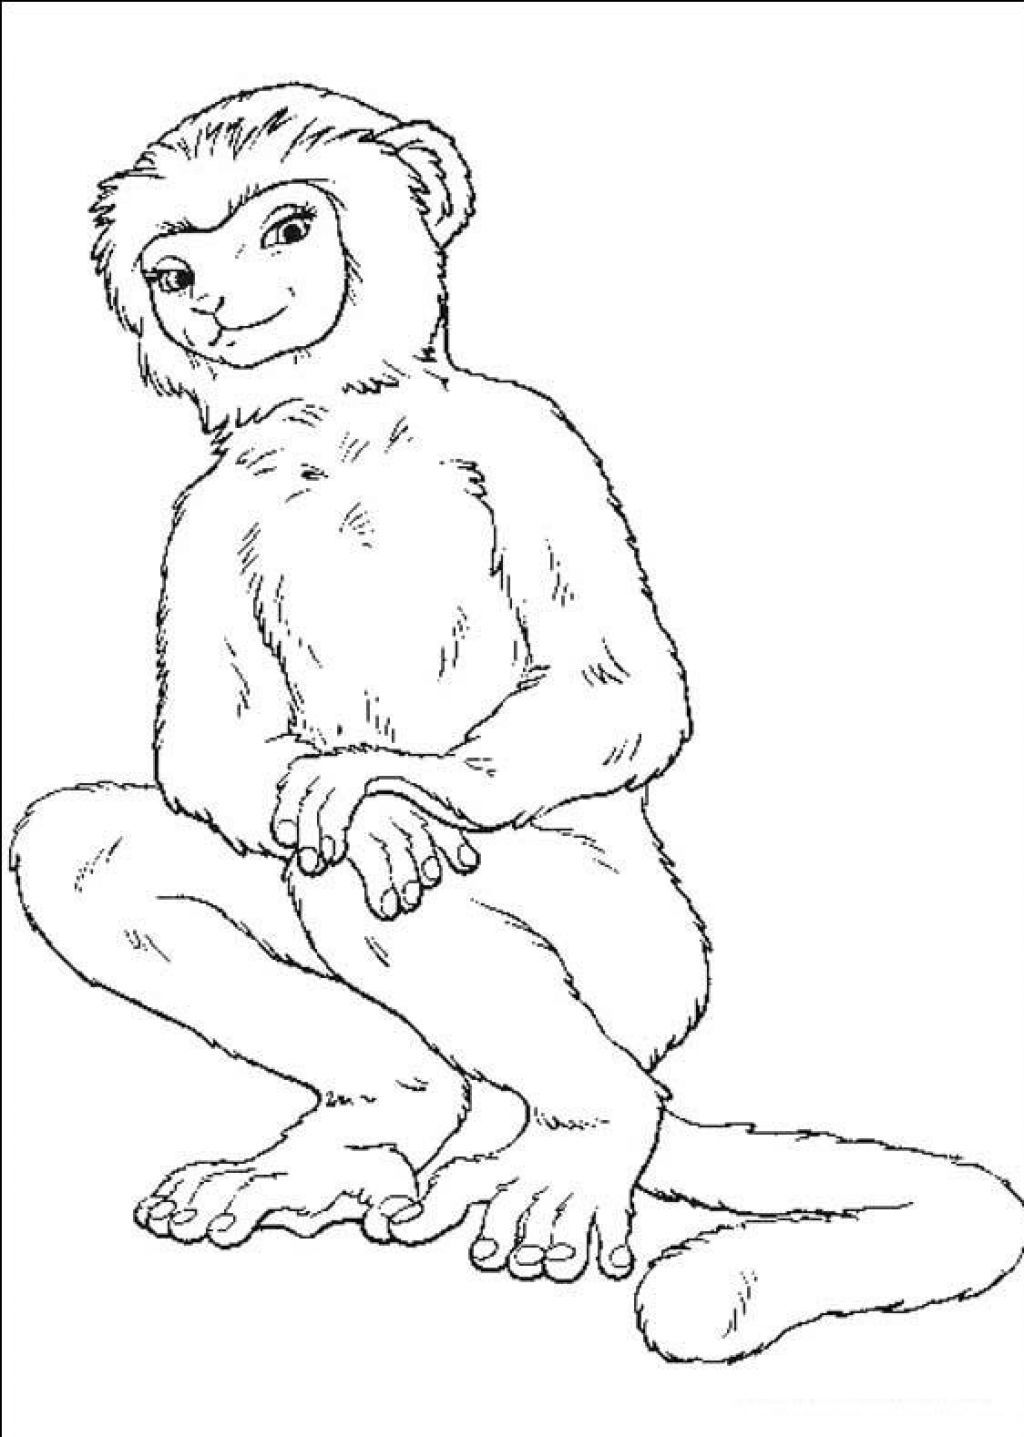 Free Printable Monkey Coloring Pages For Kids